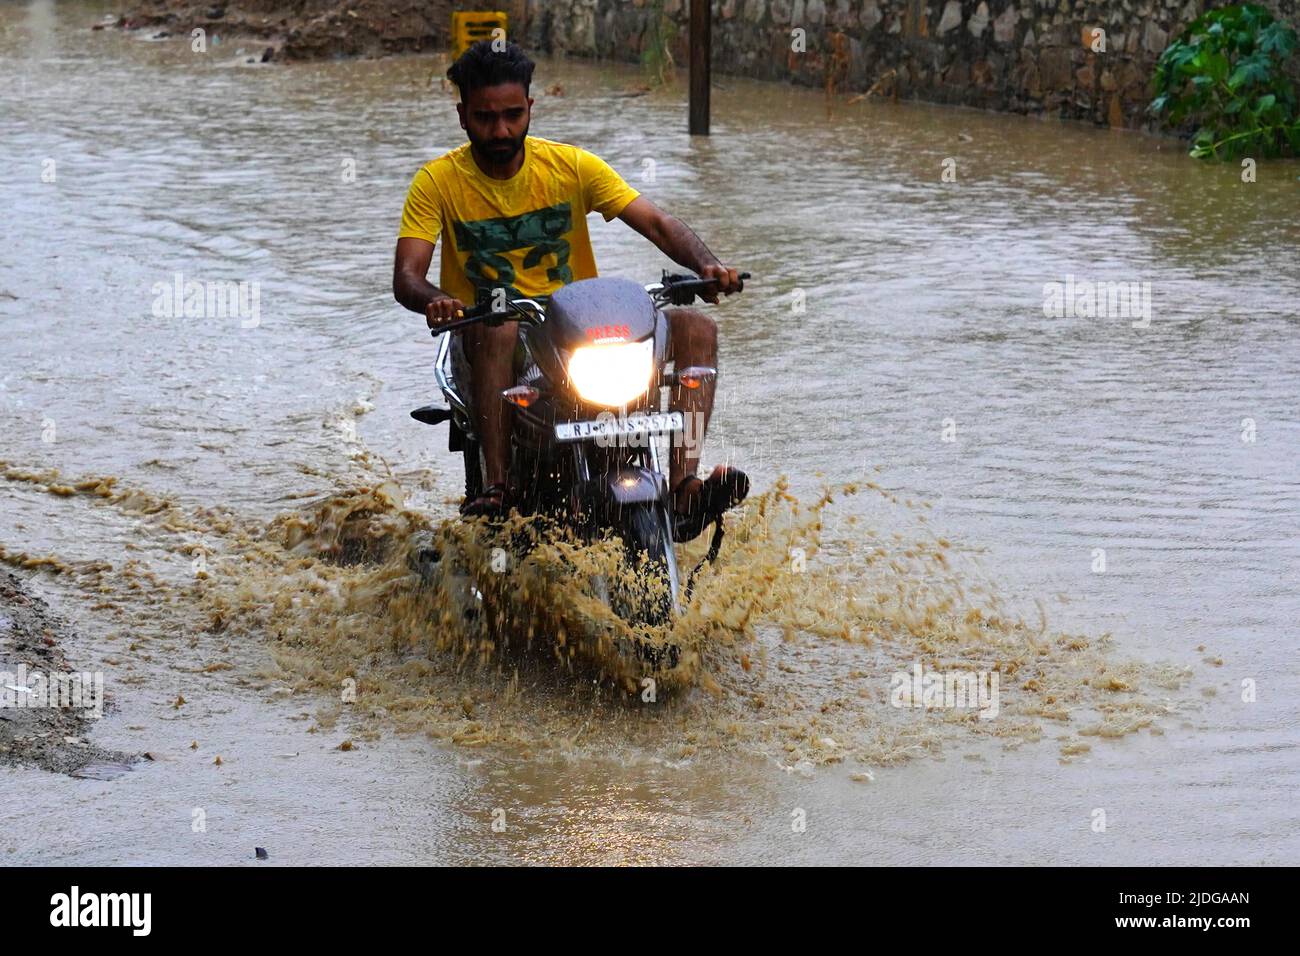 Rajasthan India On June 20 2022 Indian People Make Their Way Through A Waterlogged Road After